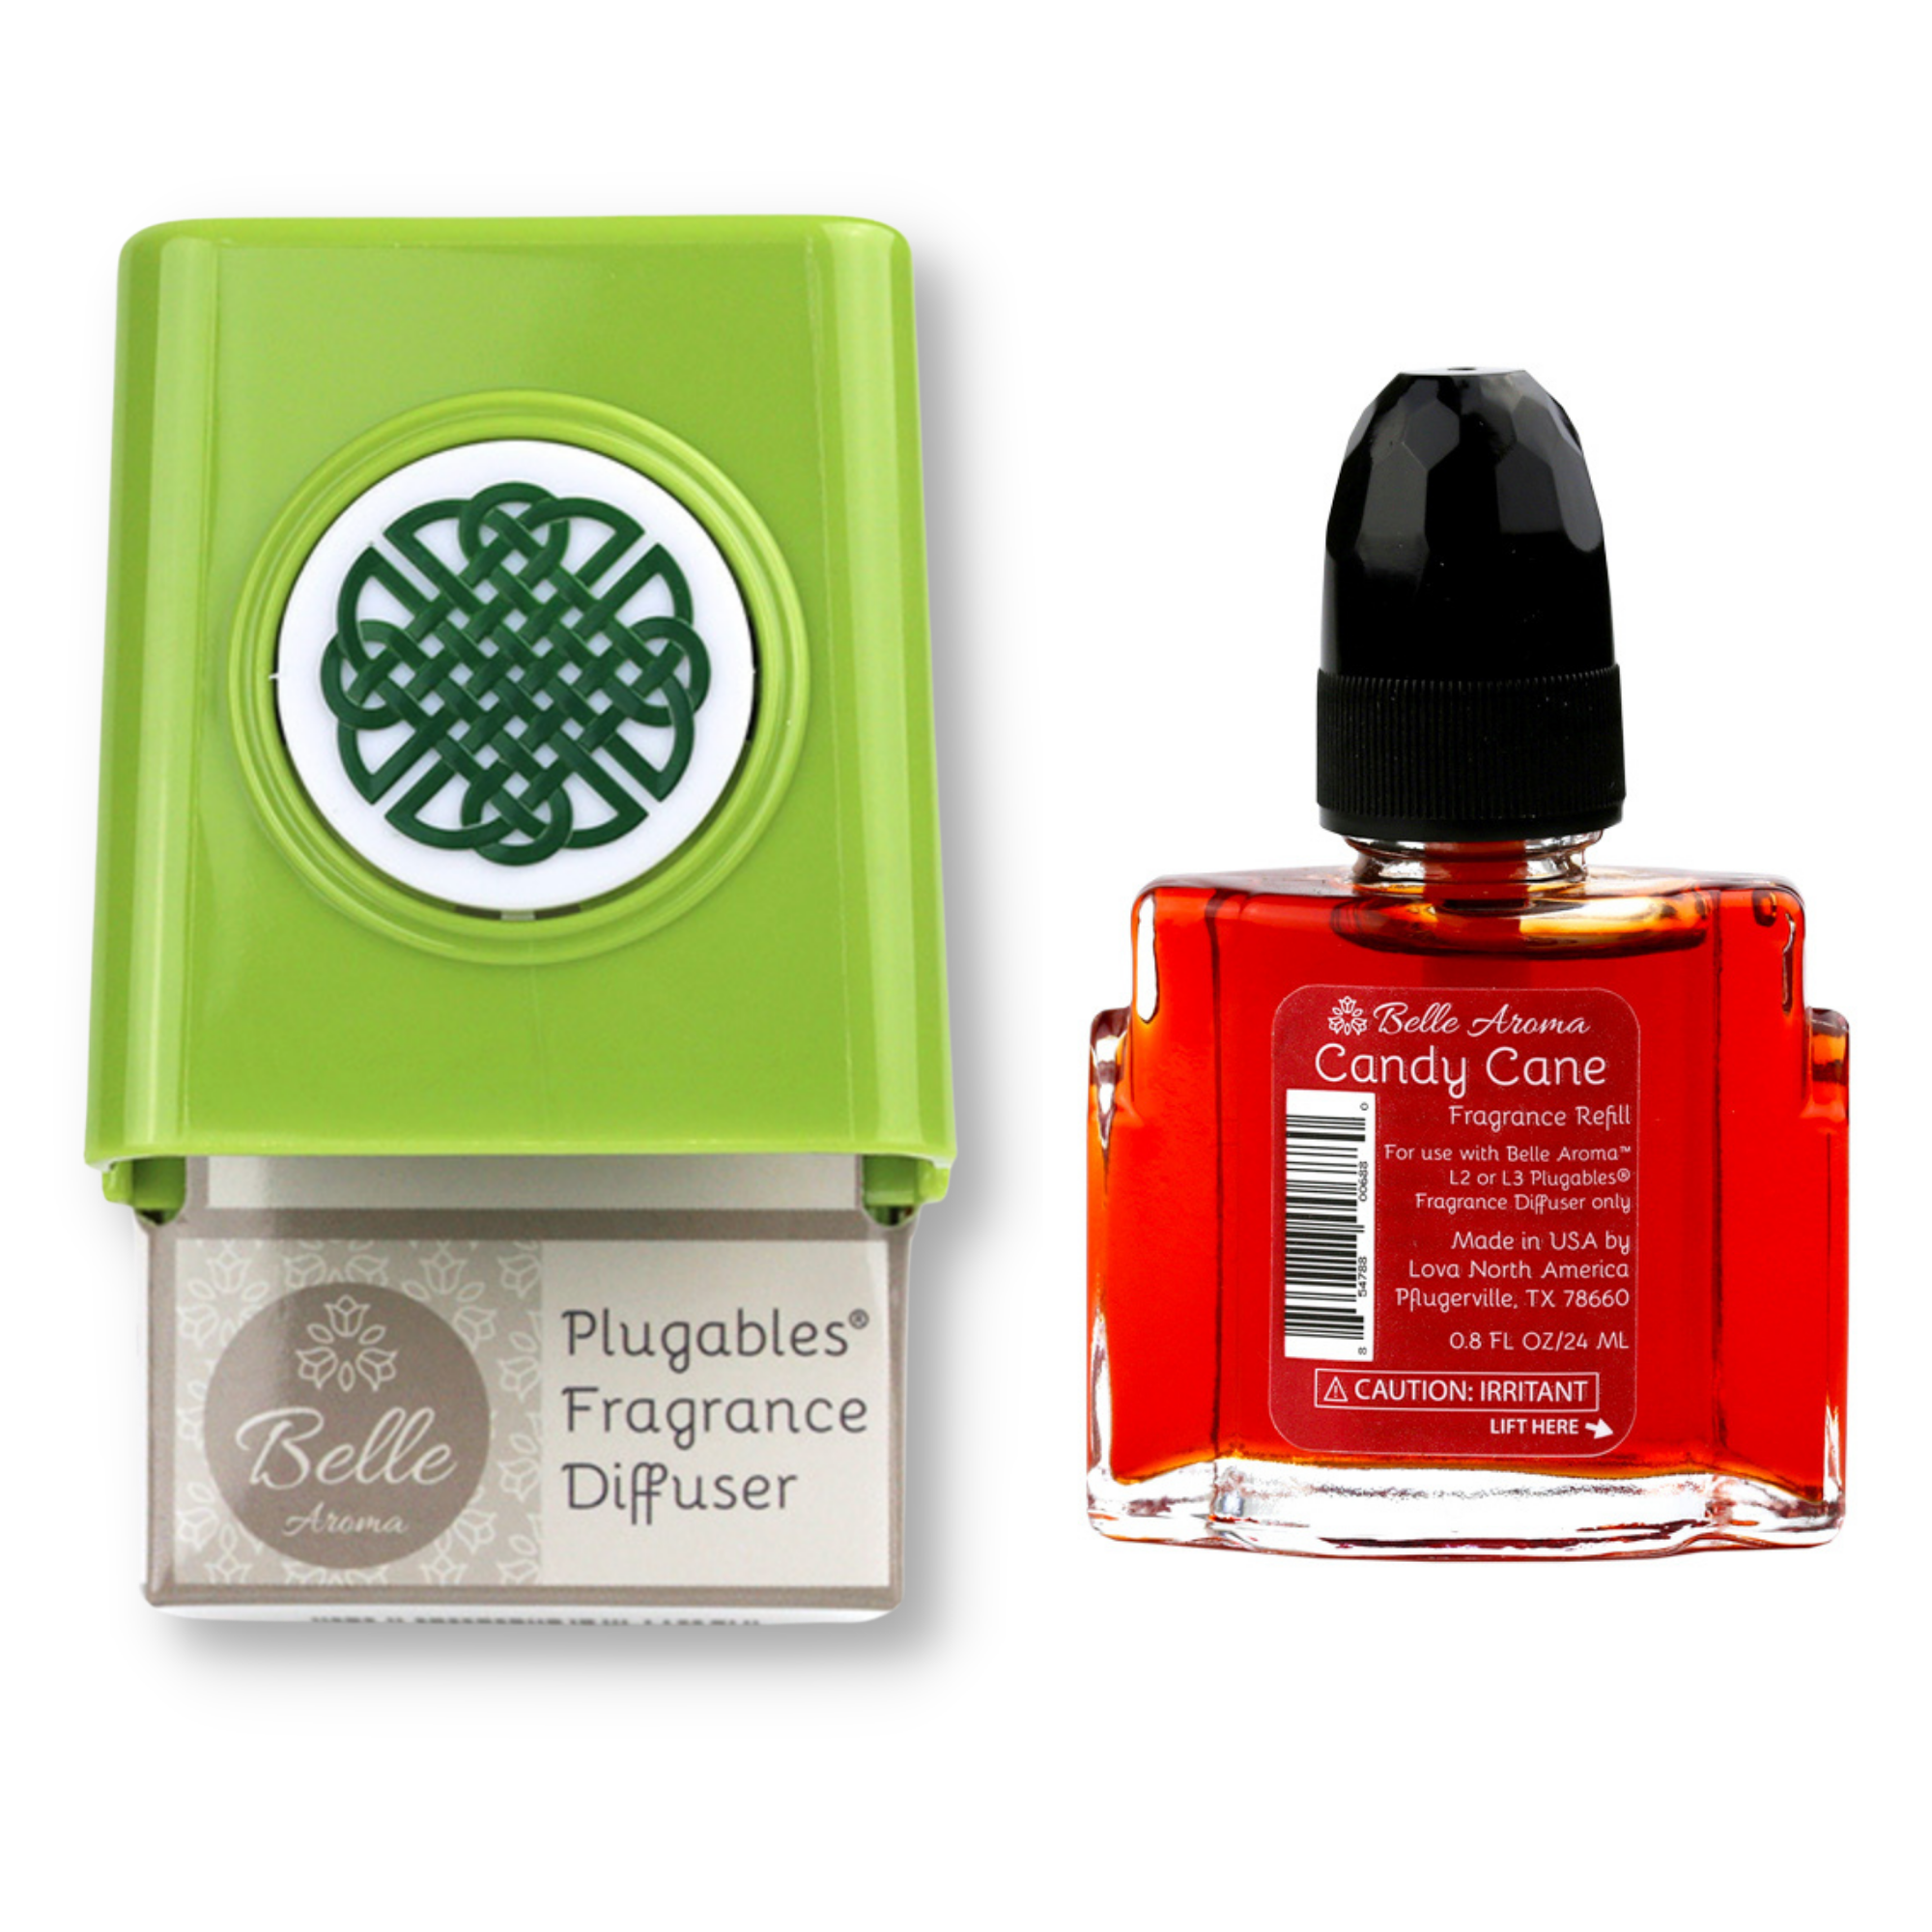 Celtic Knot Medallion Plugables® Plugin Aromalectric® Scented Oil Diffuser - Granny Smith with Candy Cane Fragrance Oil Home Fragrance Accessories